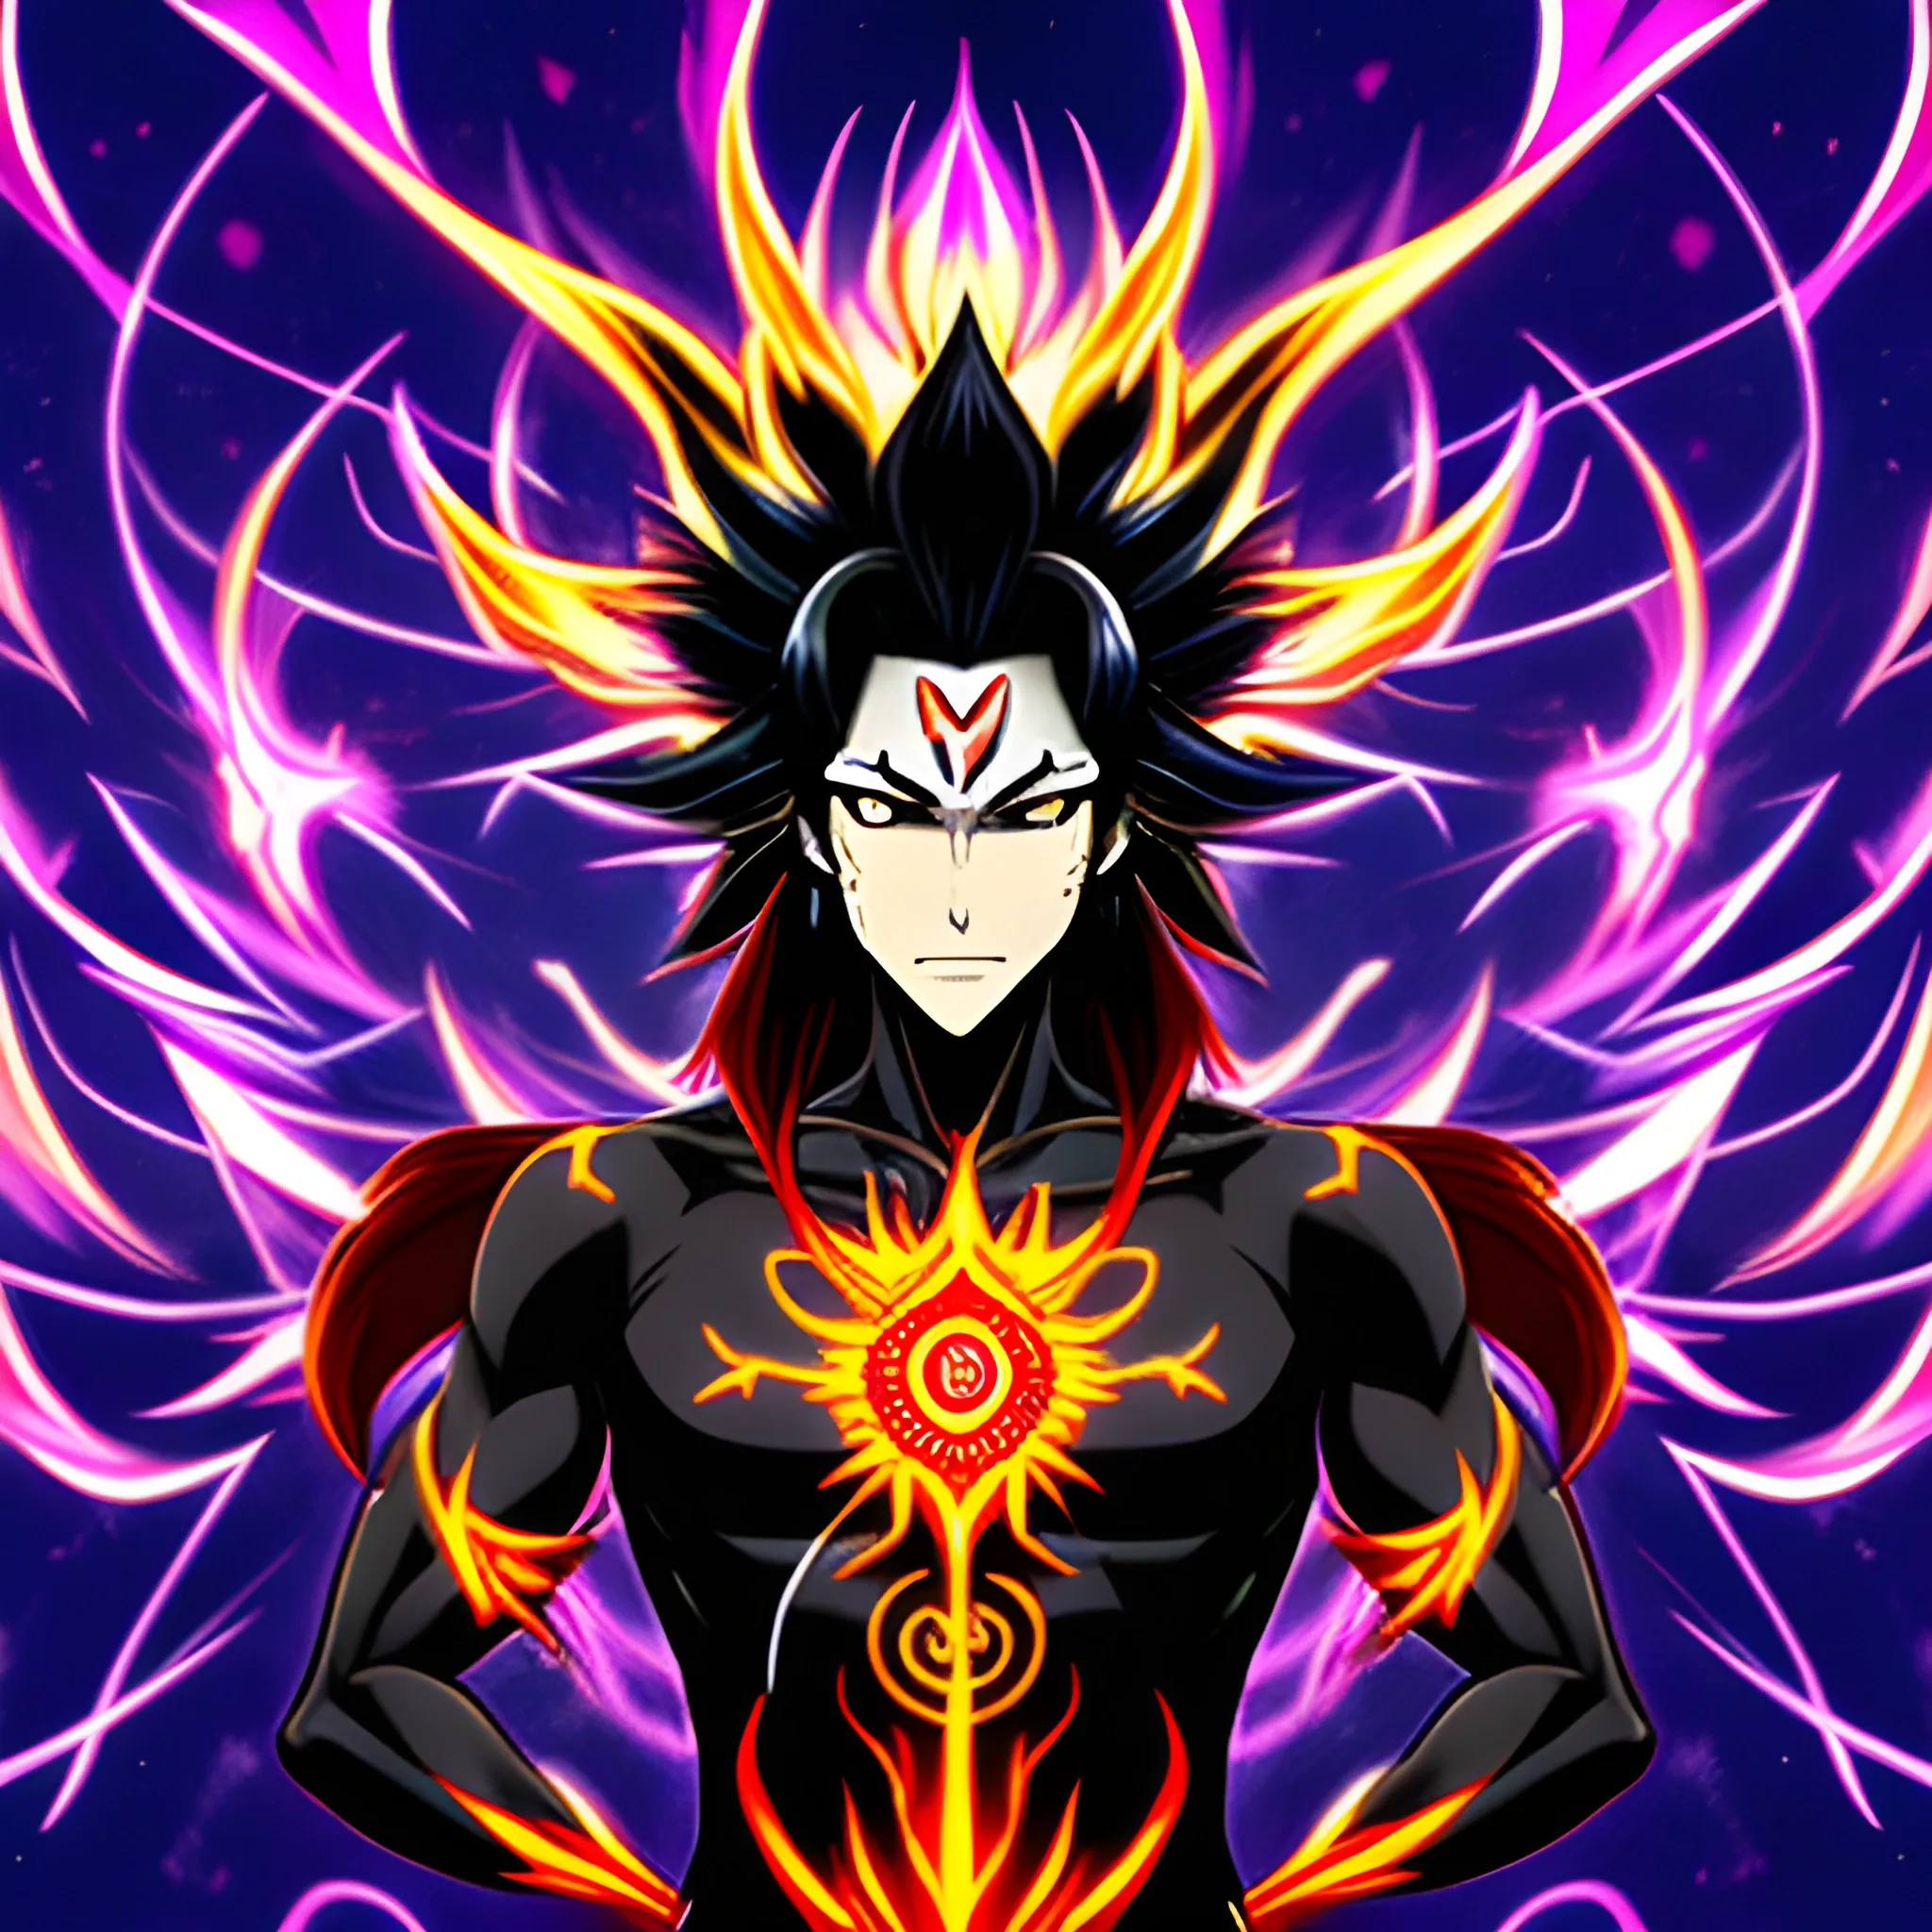 Anime style, male protegonist, black hair, blus flames, Indian, highschooler, Shiva, young, human, medium hair, normal world., Trippy